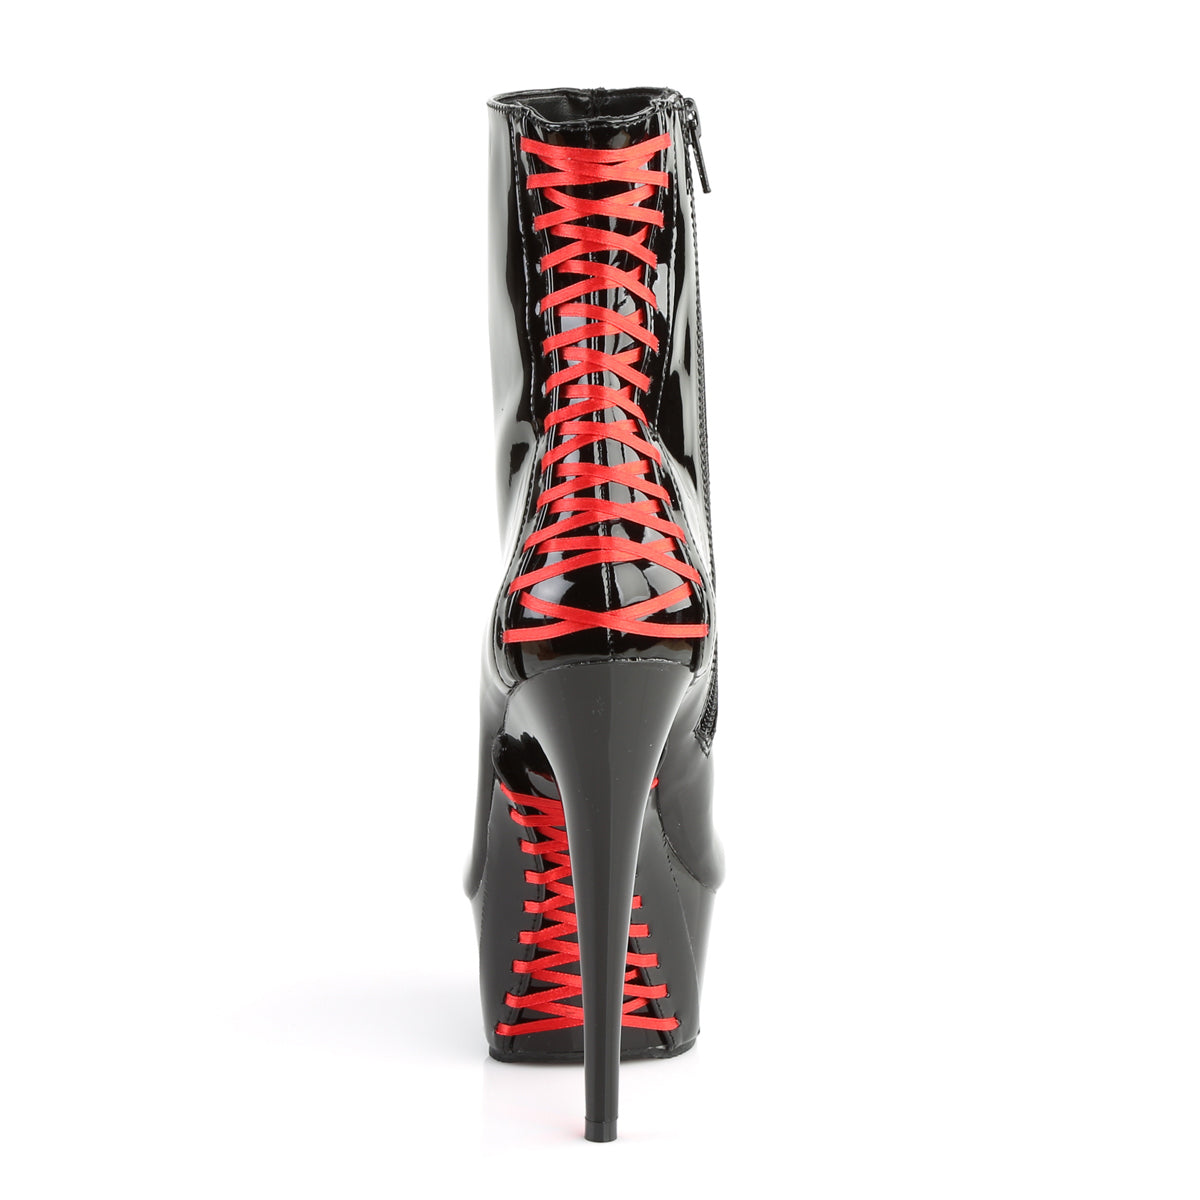 DELIGHT-1010 6" Heel Black and Red Pole Dancing Platforms-Pleaser- Sexy Shoes Fetish Footwear